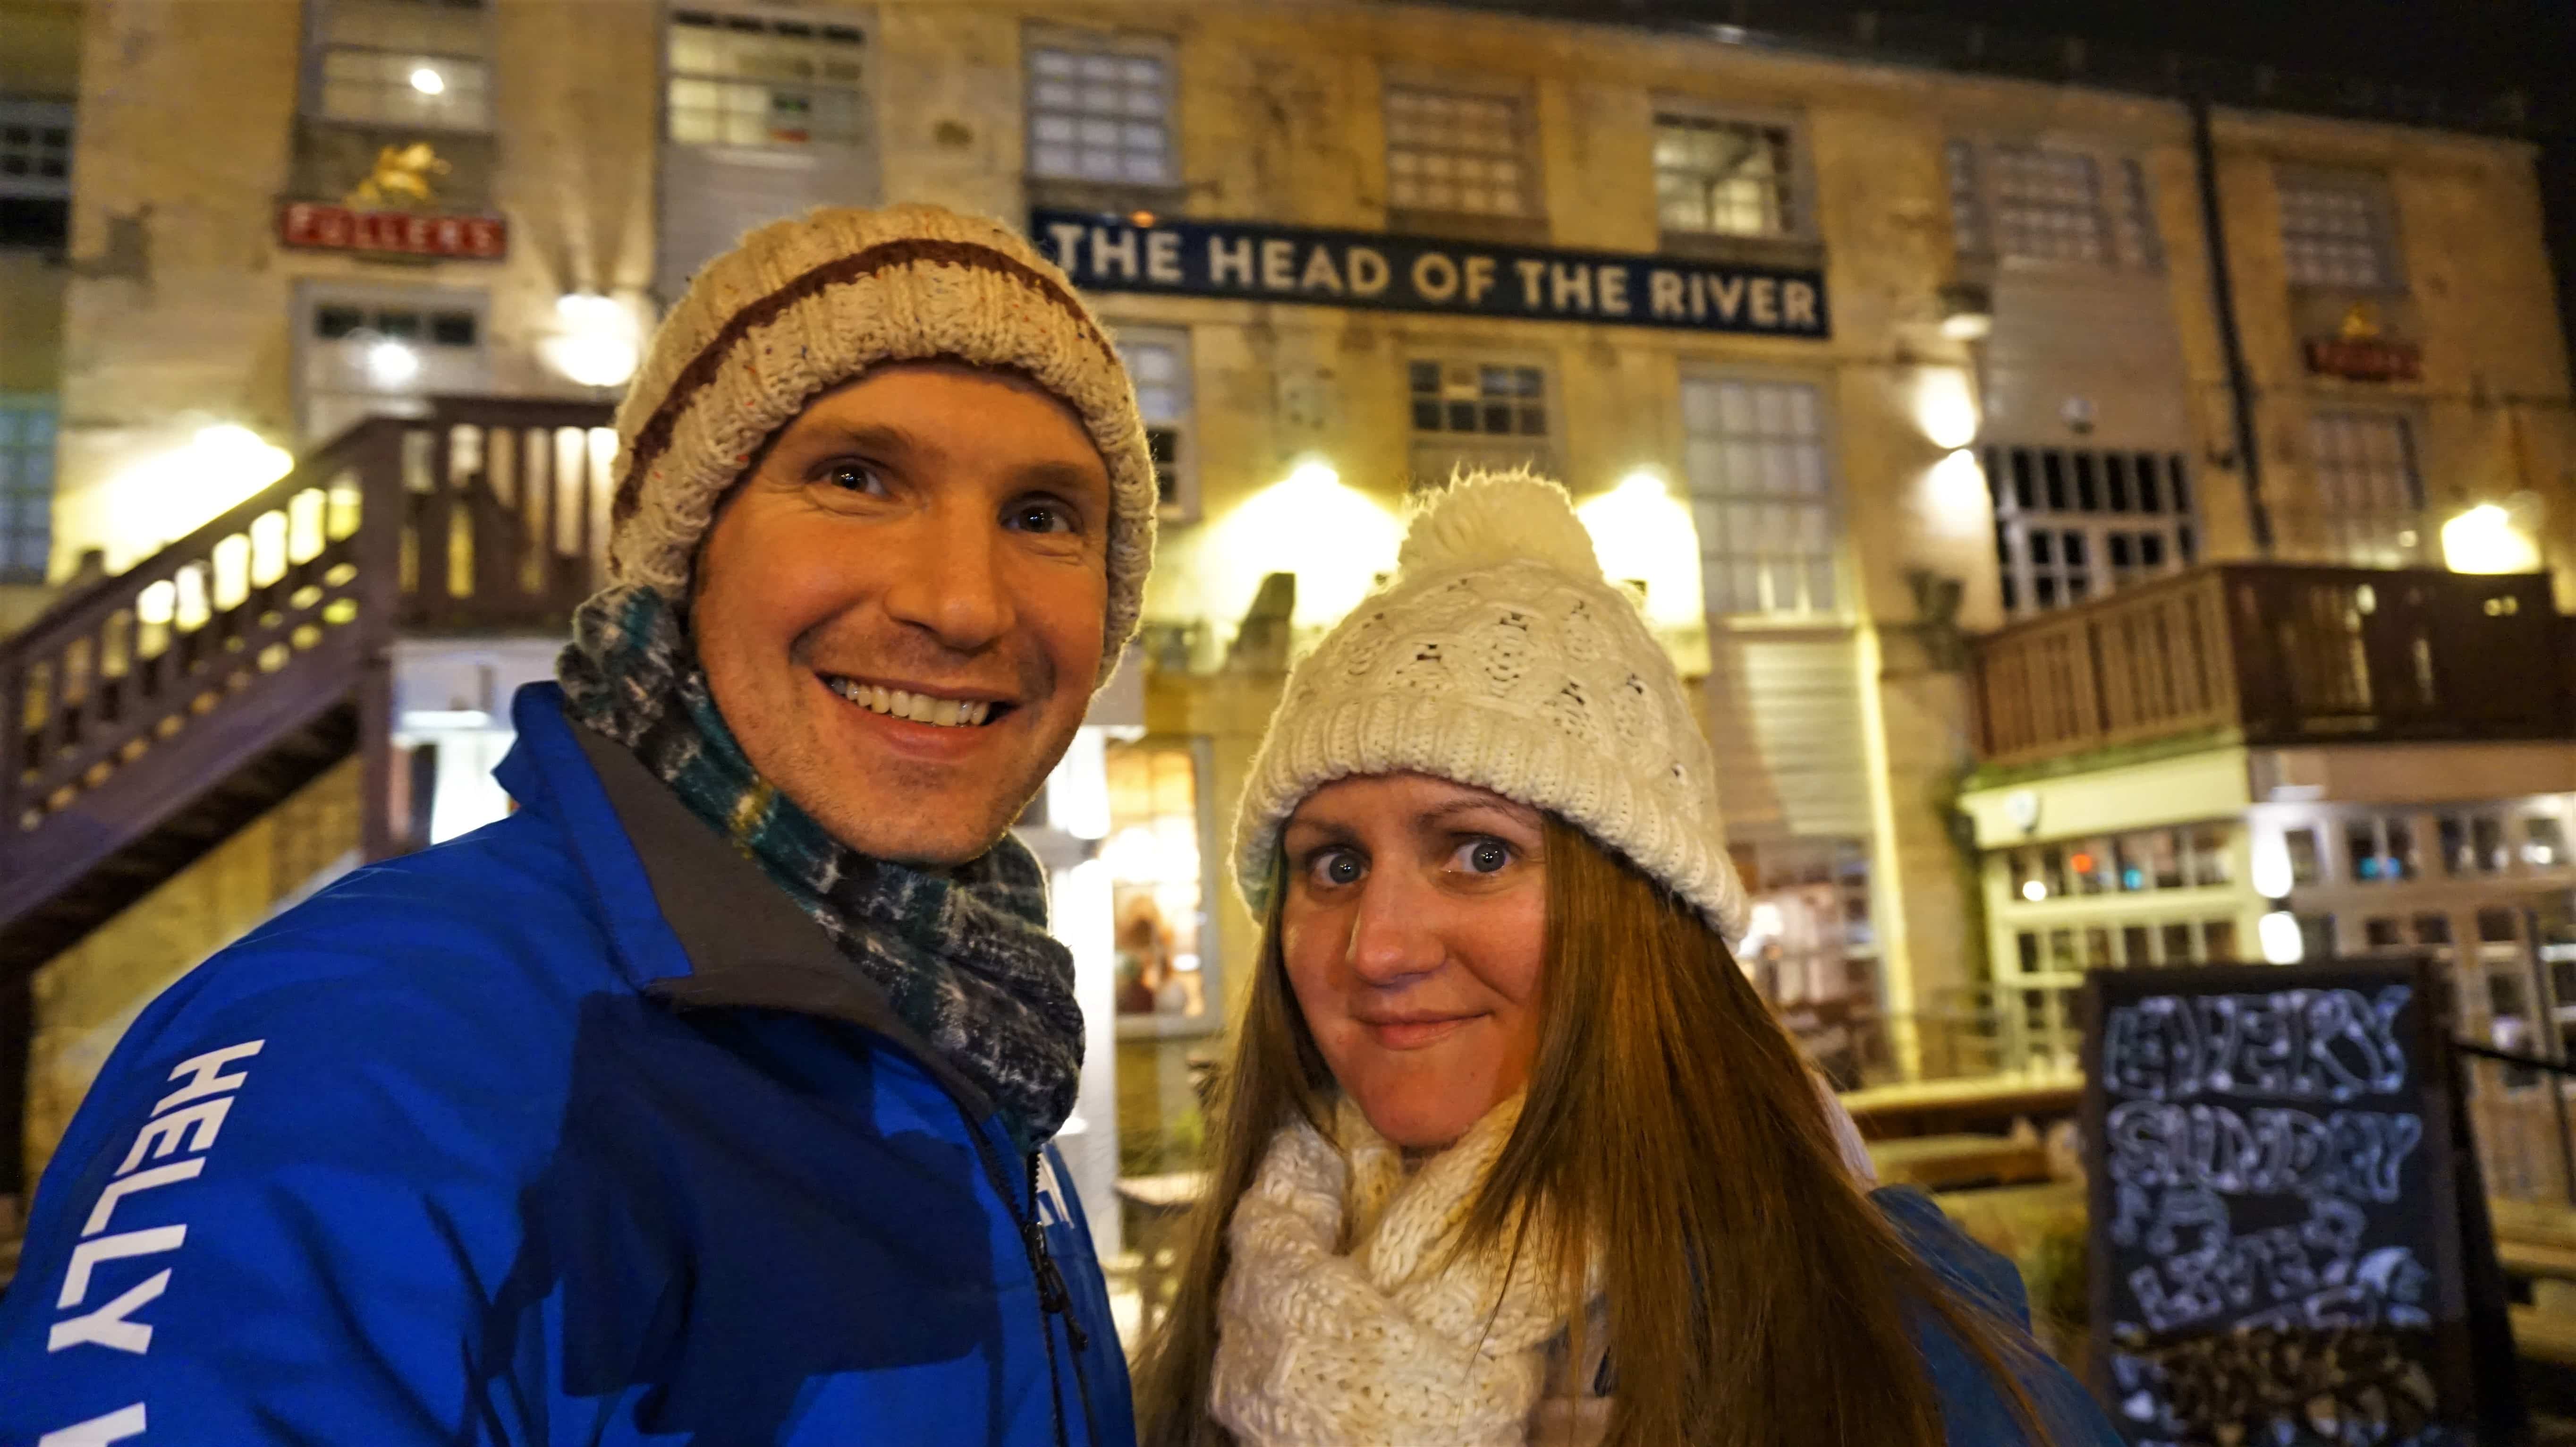 Selfie outside the Head of the River in Oxford